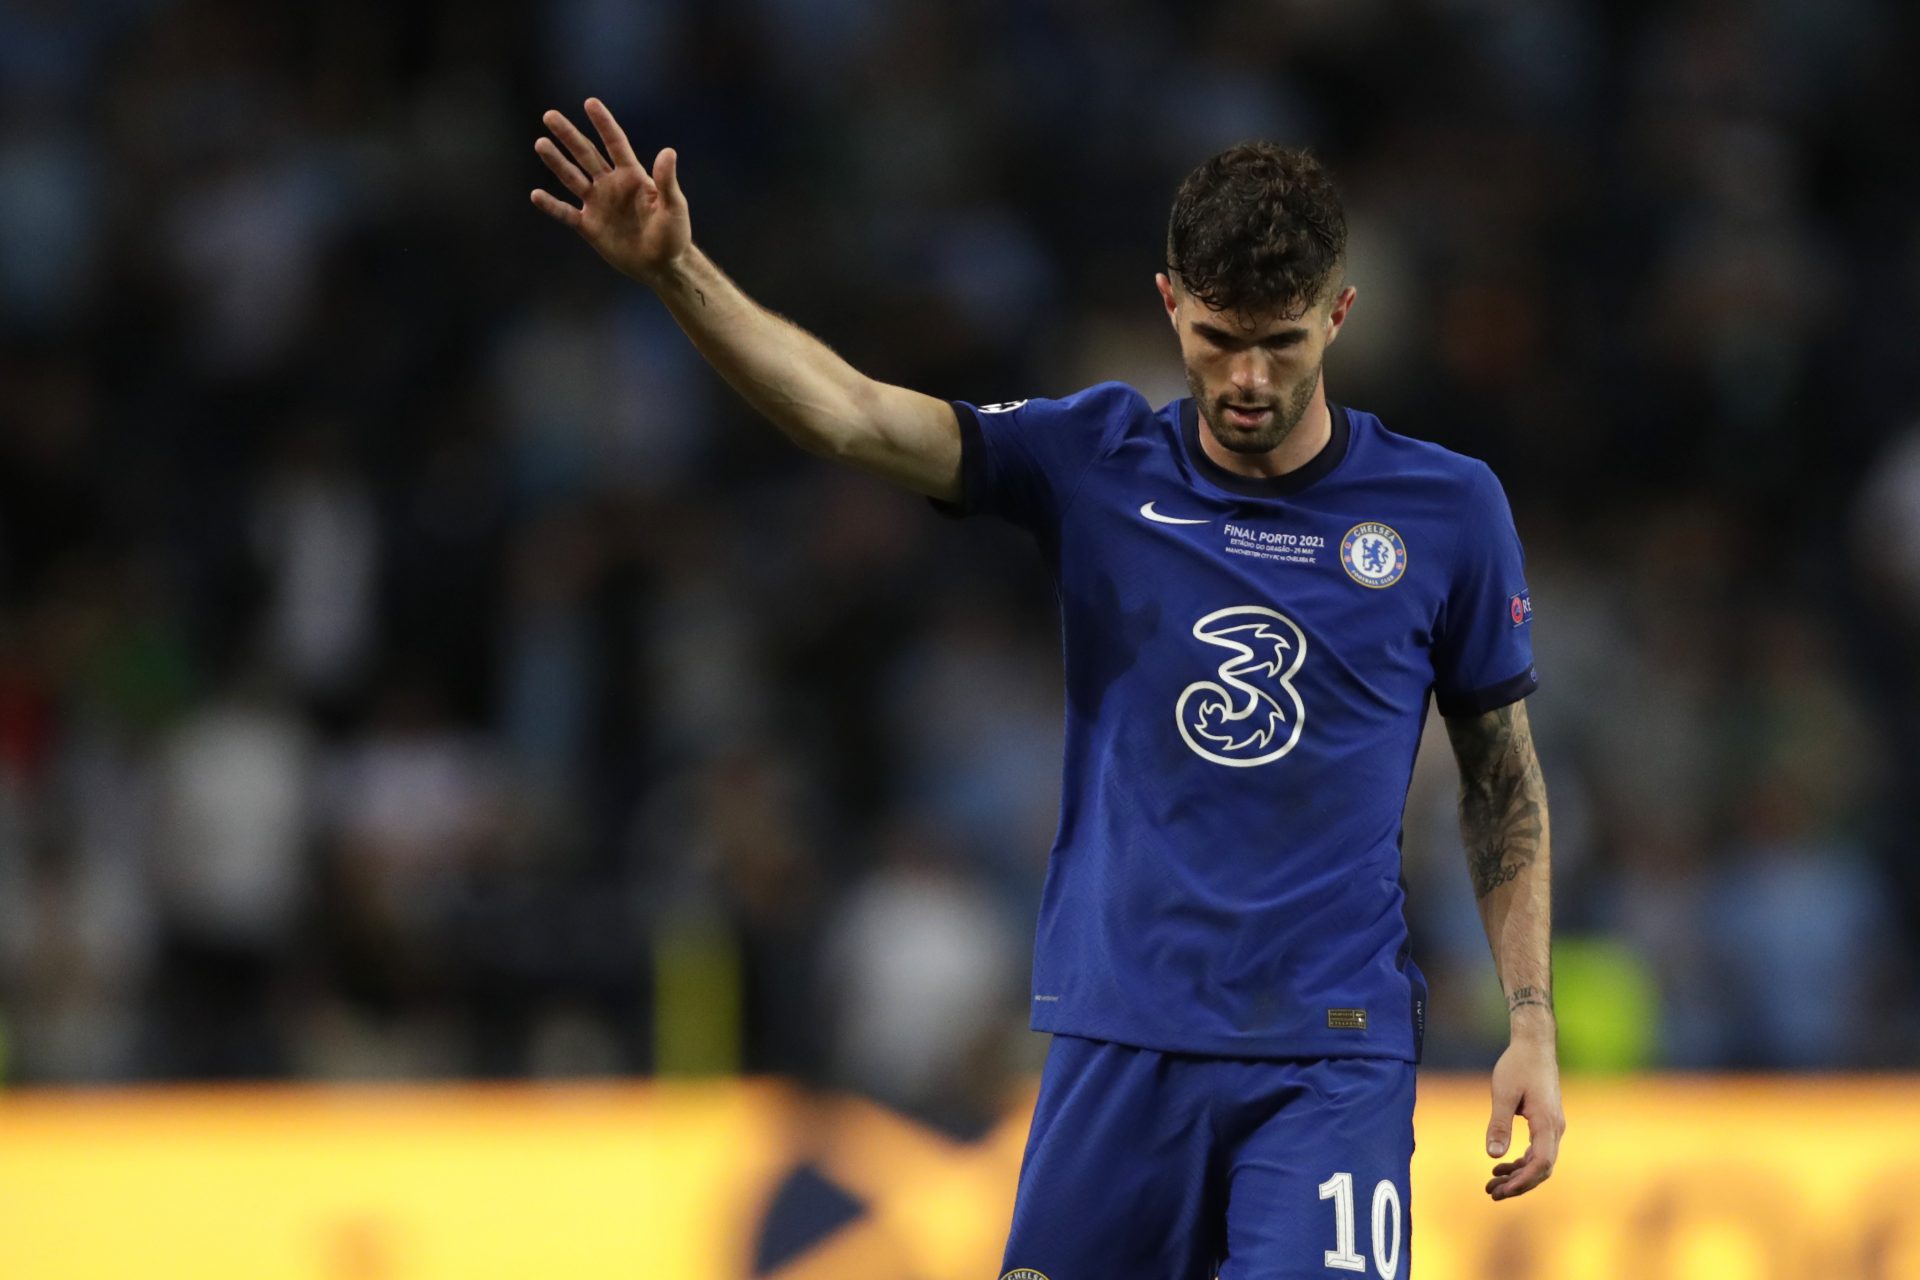 Chelsea's Christian Pulisic gestures during the Champions League final soccer match between Manchester City and Chelsea at the Dragao Stadium in Porto, Portugal, Saturday, May 29, 2021.